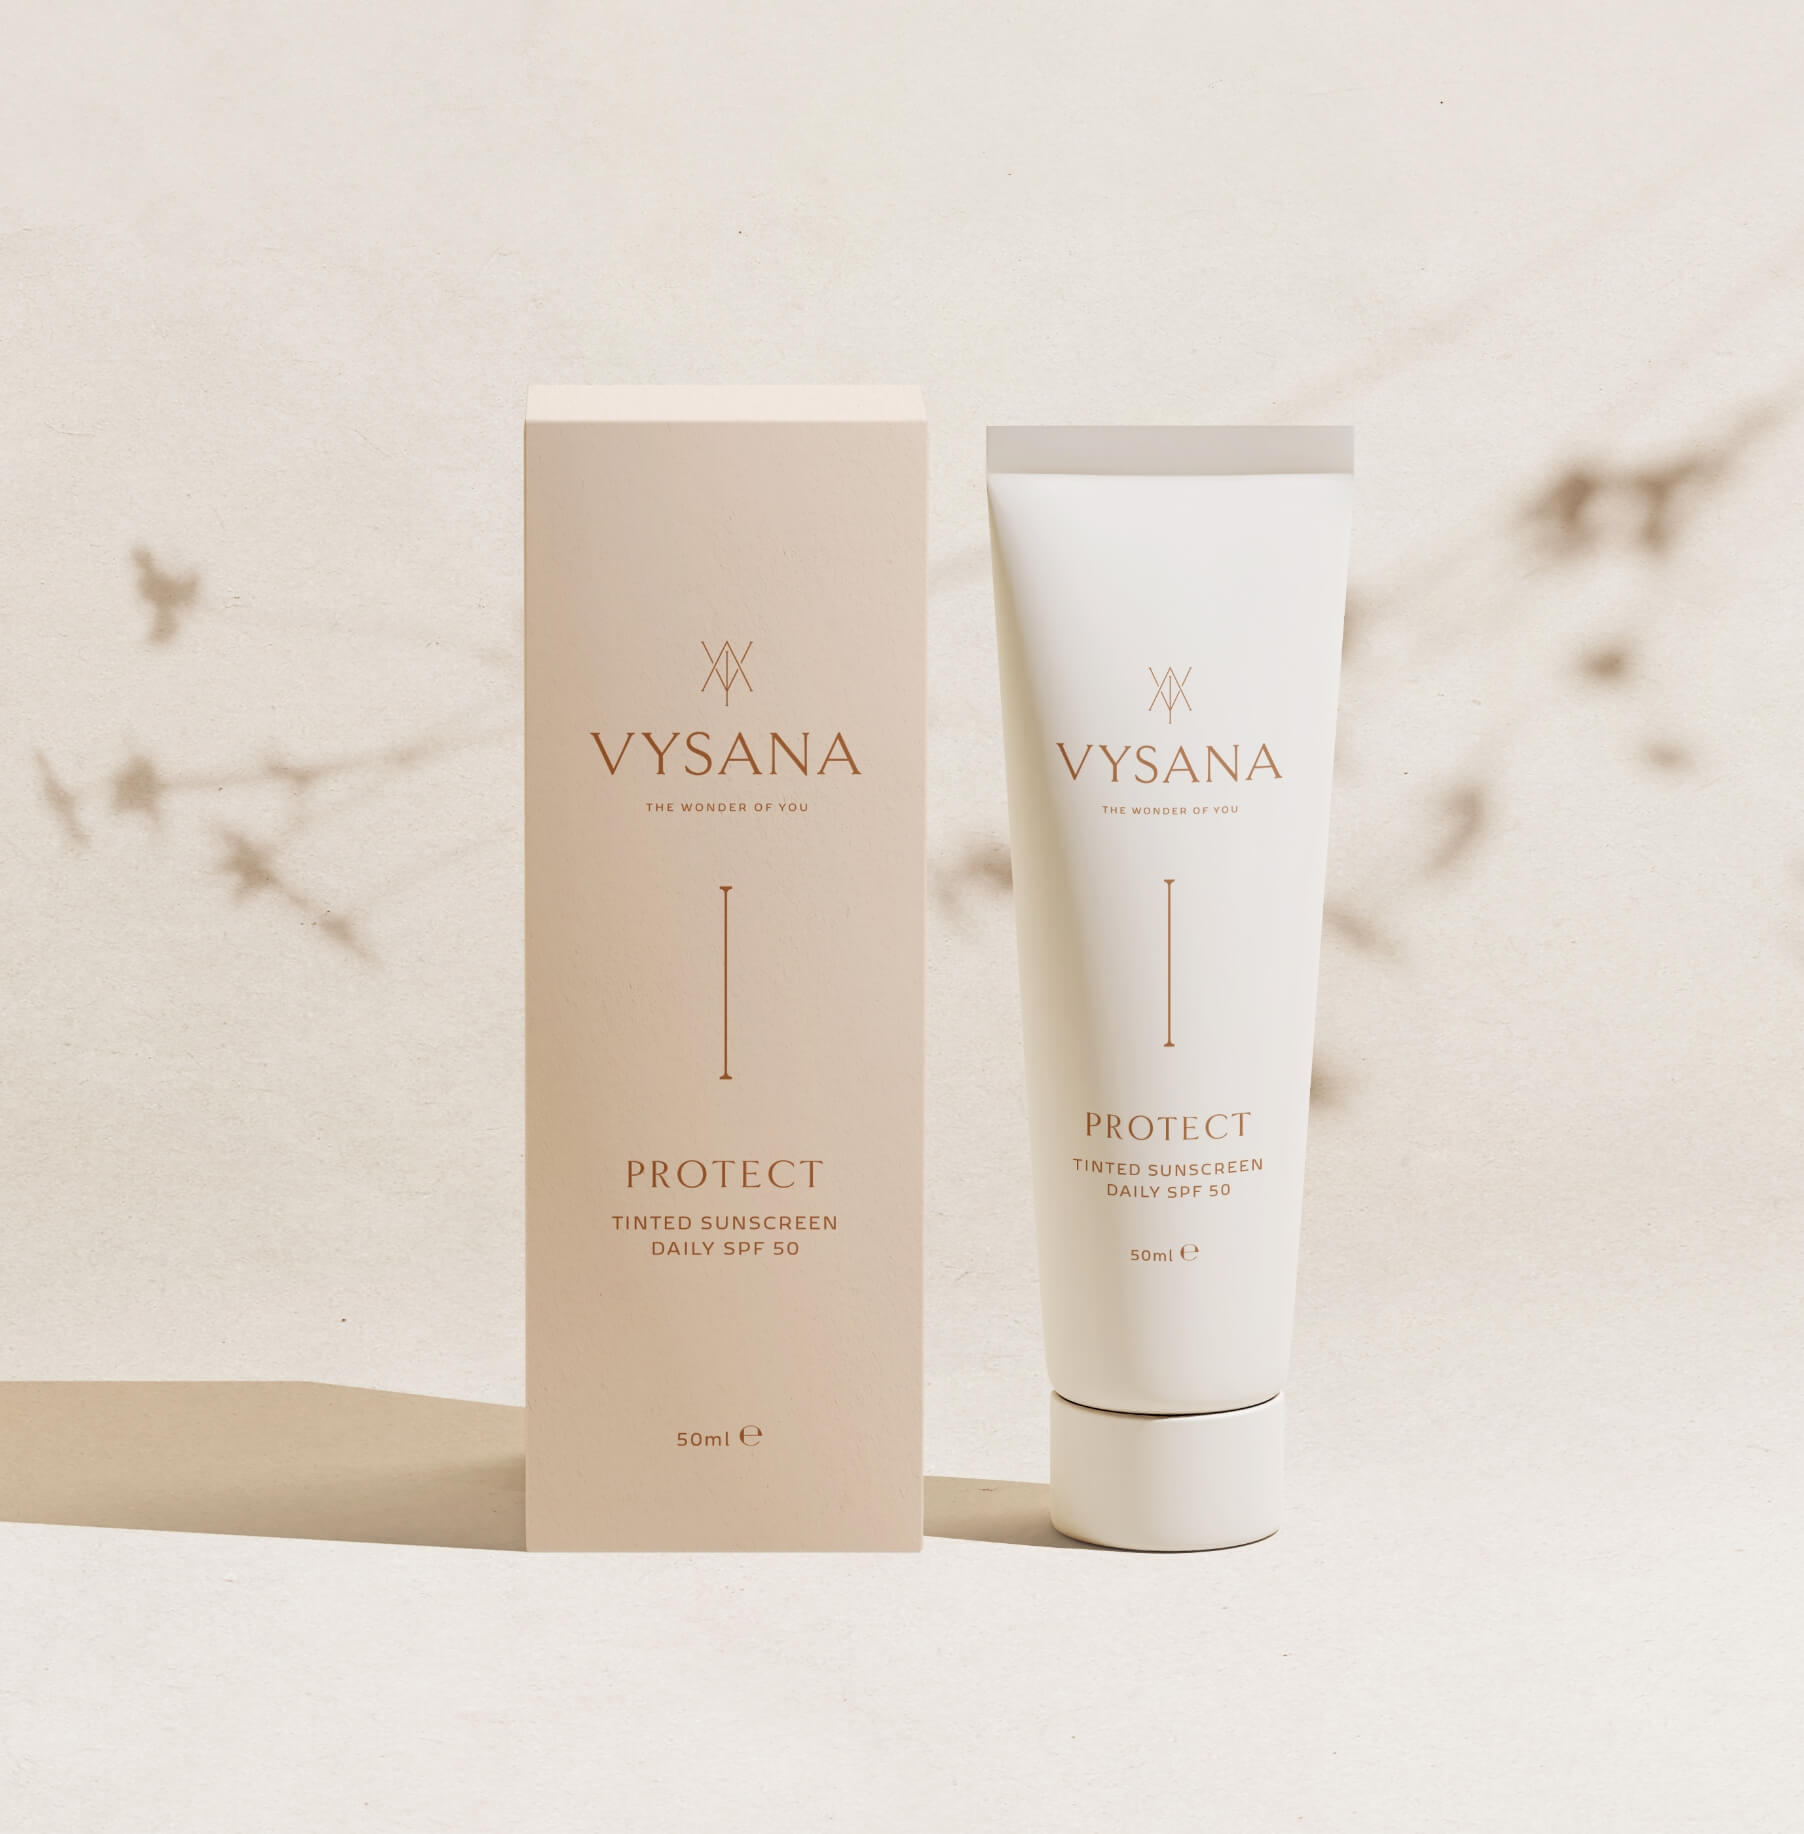 Vysana dual luxury skincare brand packaging design and product information